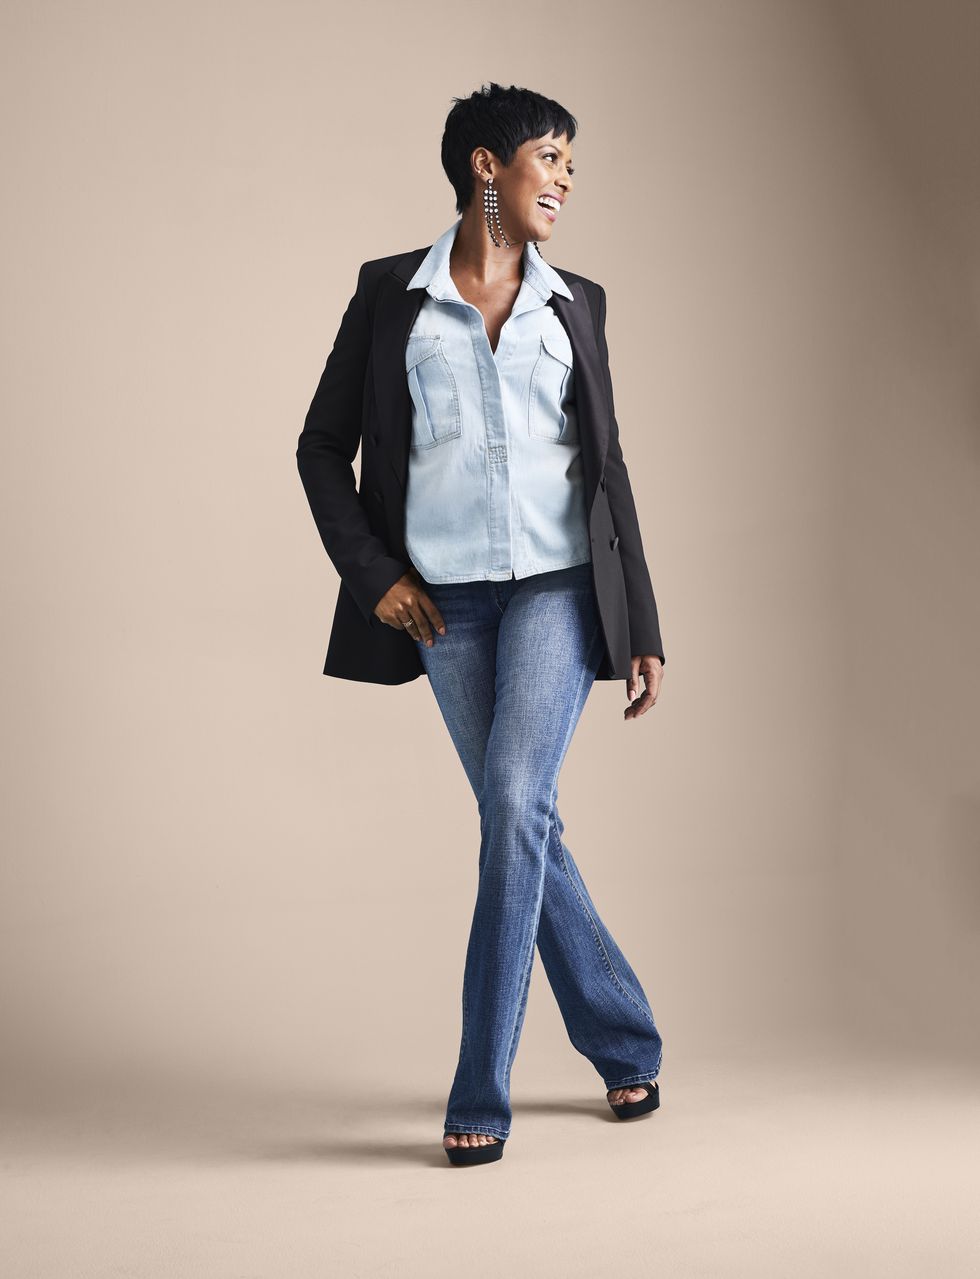 Tamron Hall Clothes, Style, Outfits, Fashion, Looks